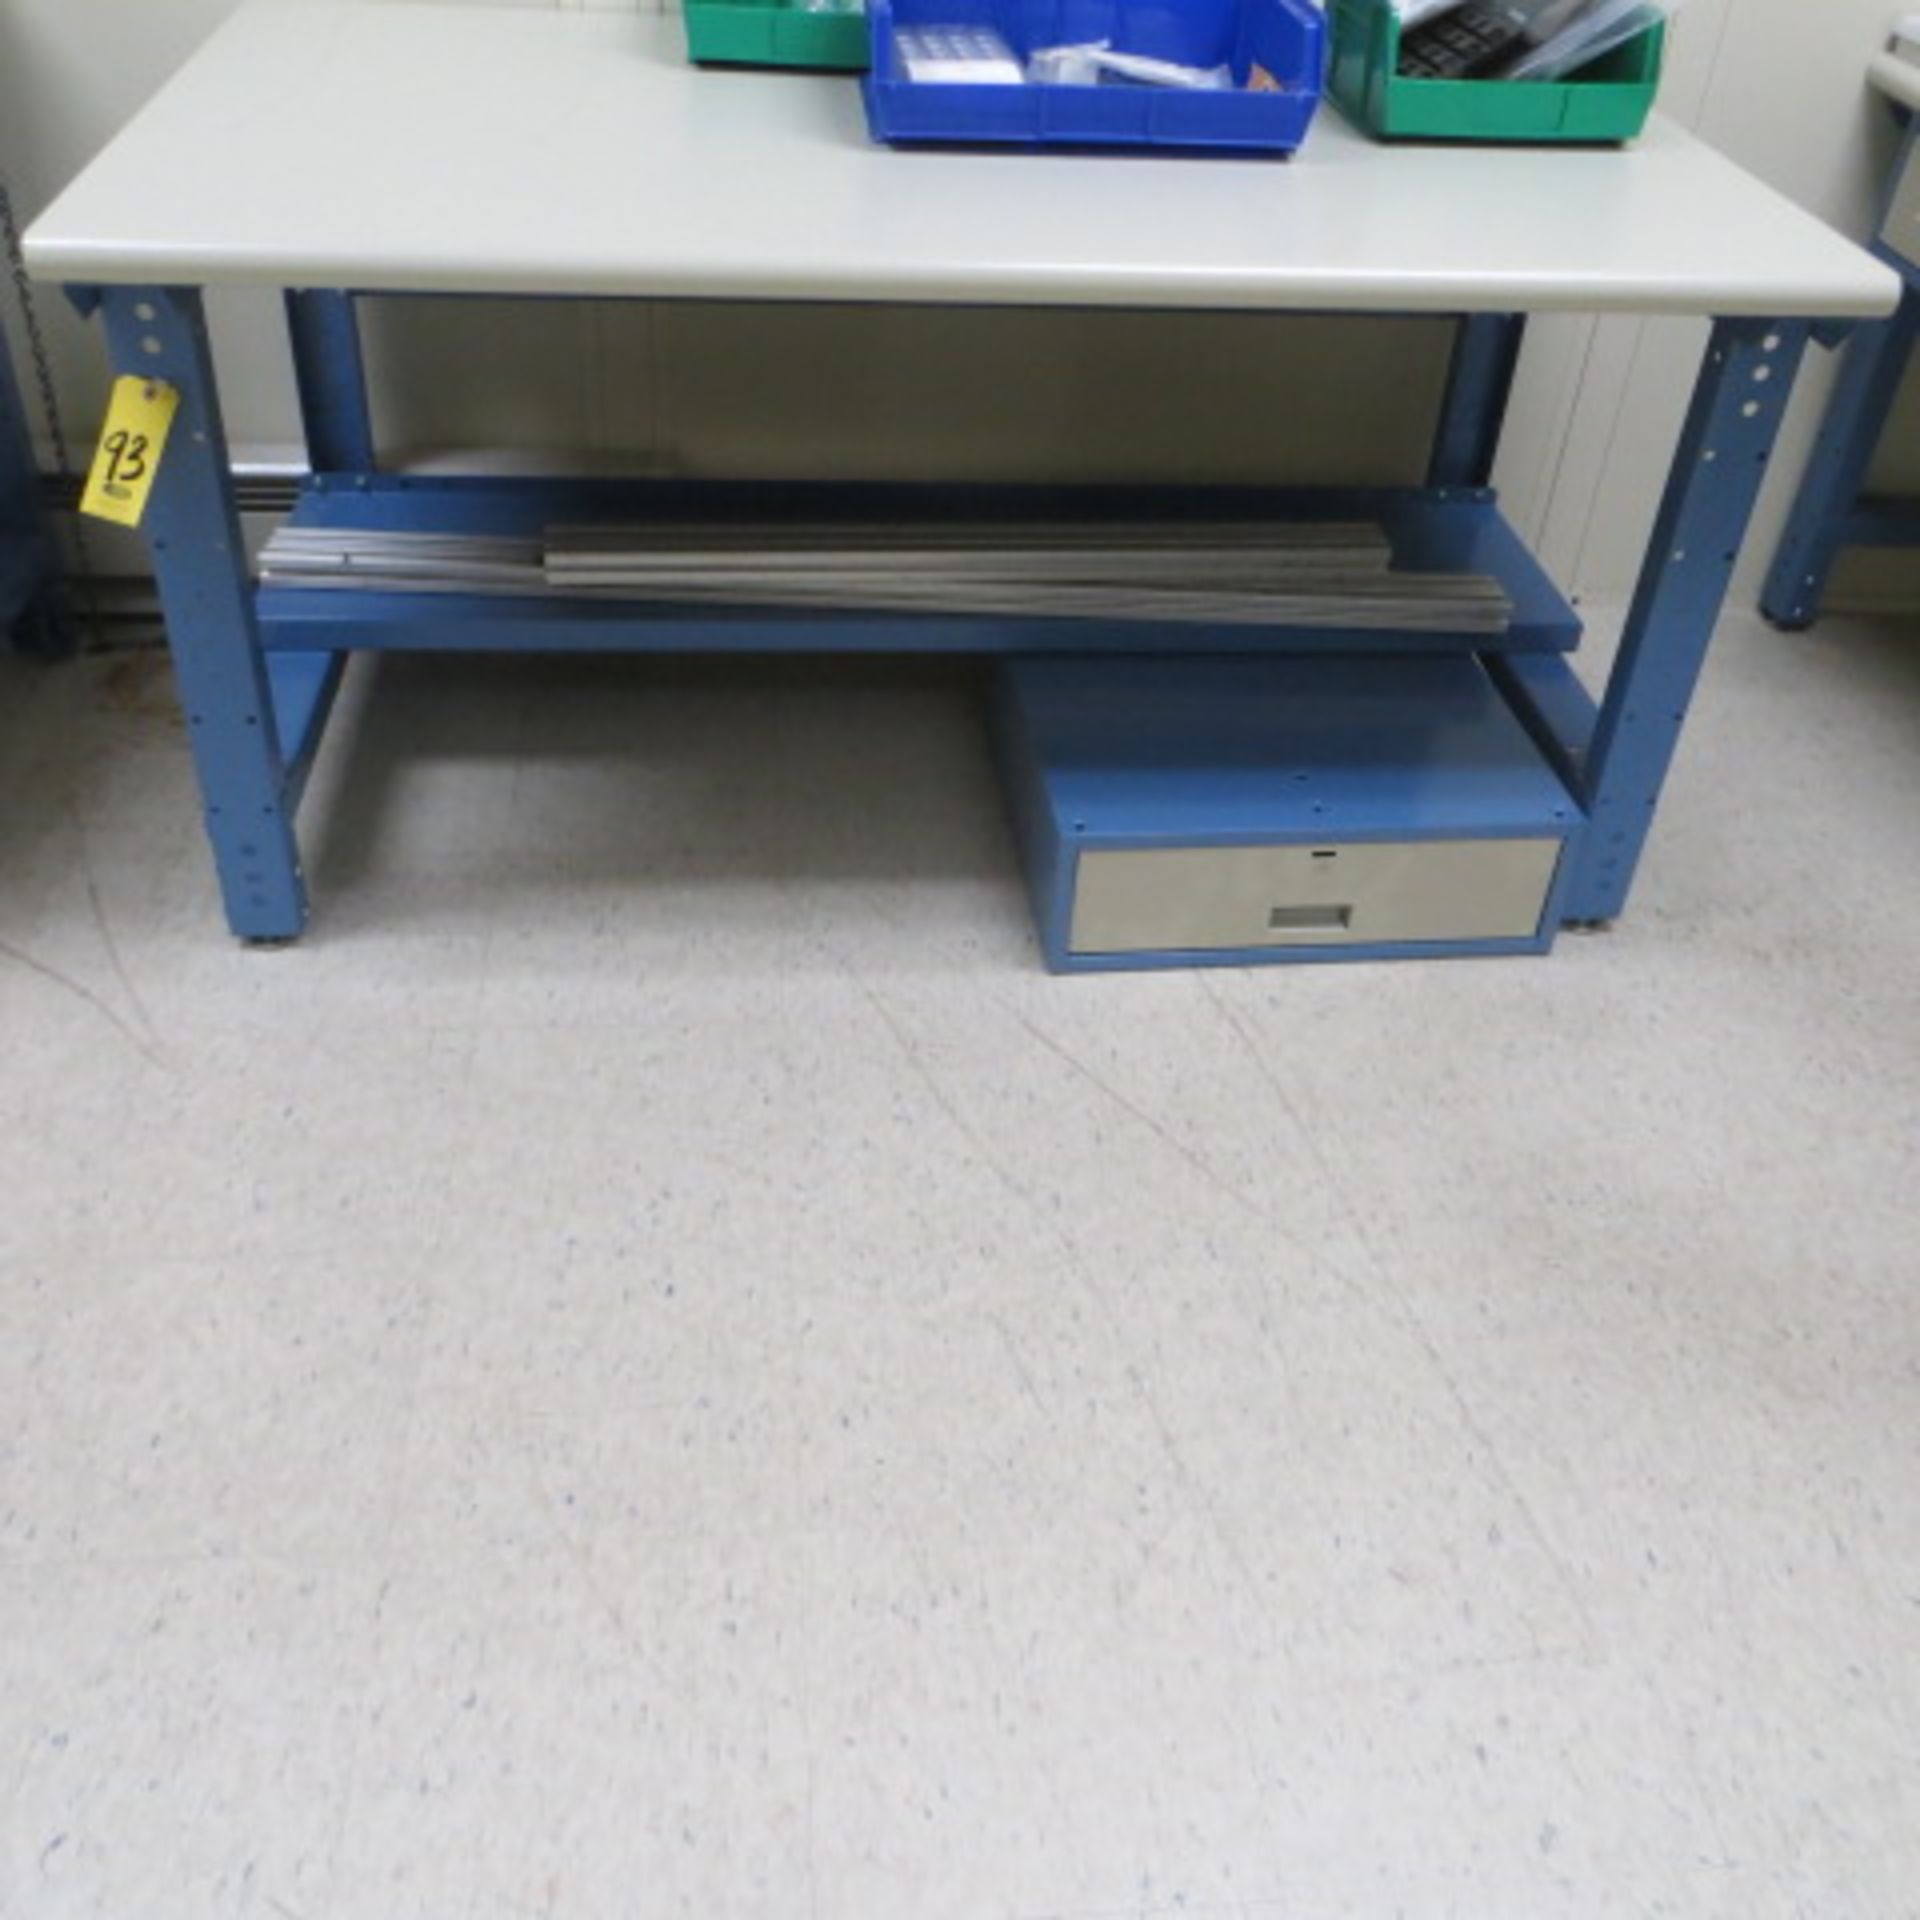 60' 7 72" ELECTRONIC WORK BENCHES W/ DRAWERS